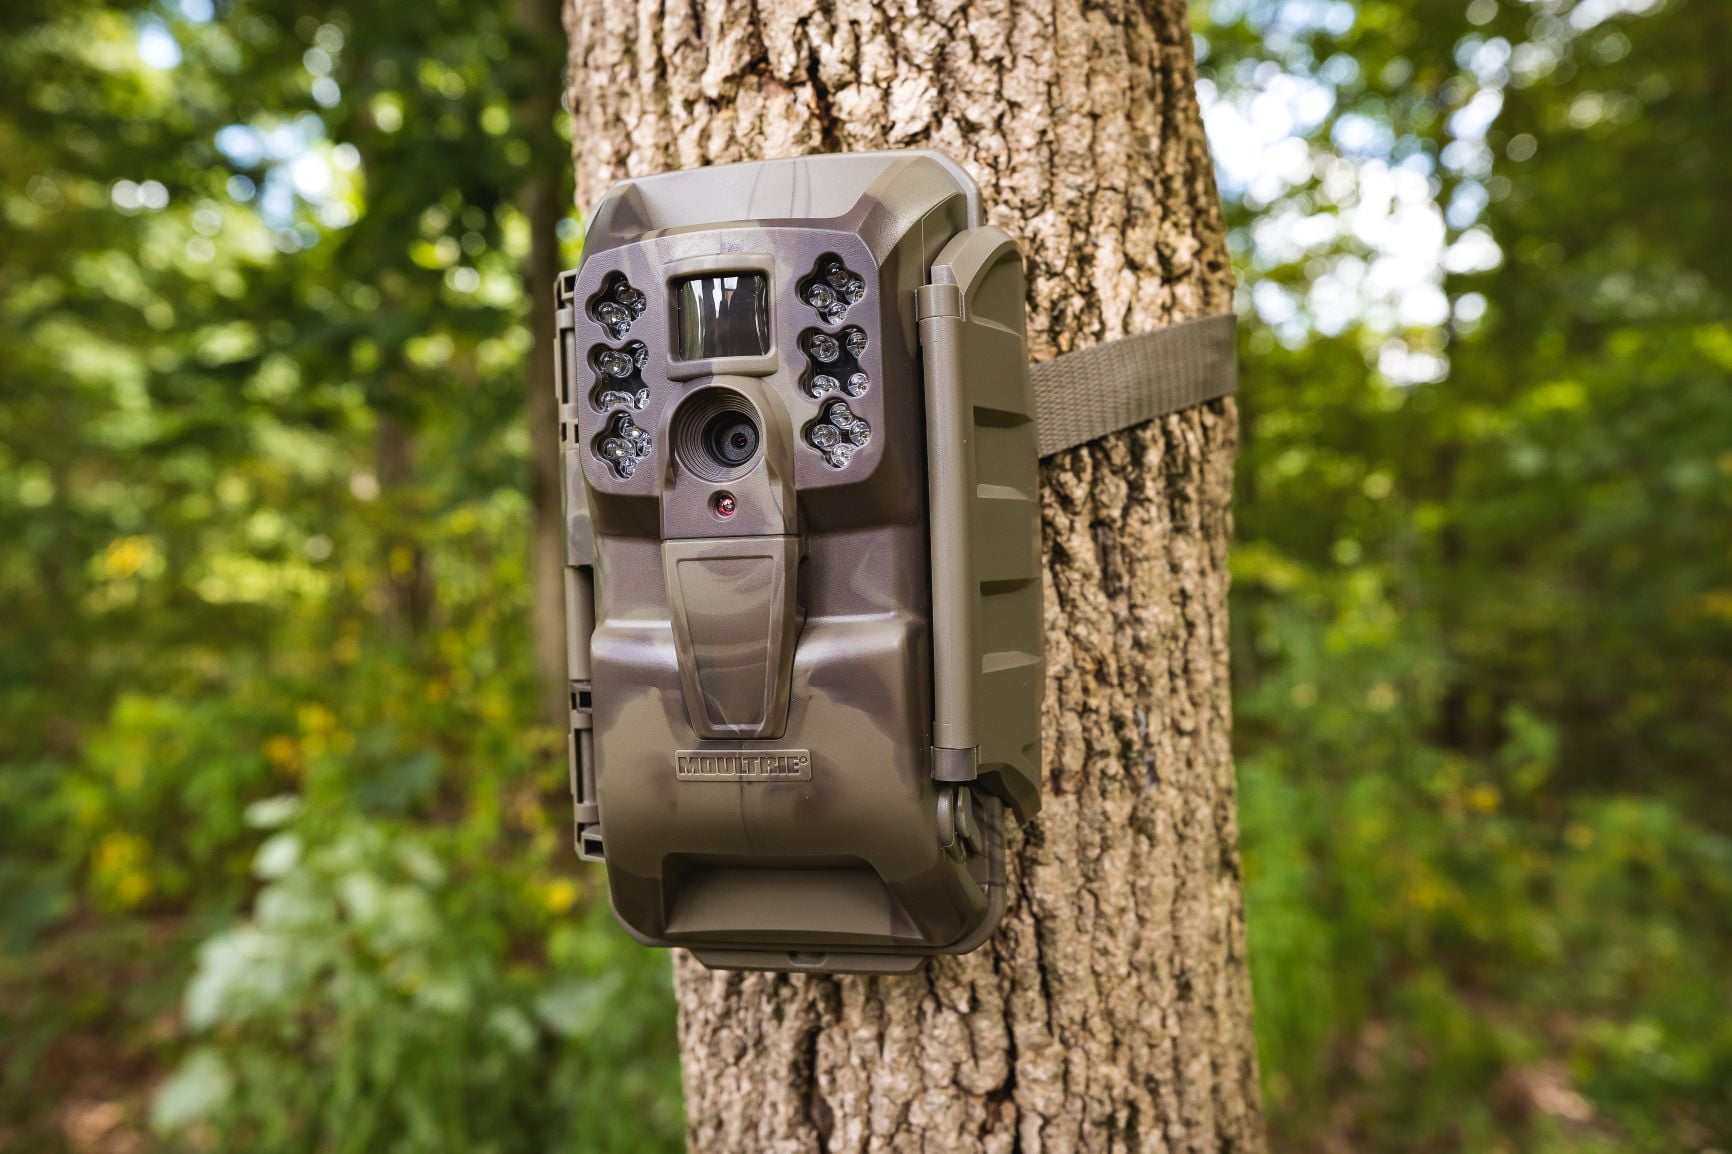 Moultrie Mobile Cellular Verizon 4G LTE Integrated Game Trail Camera WV-6000 